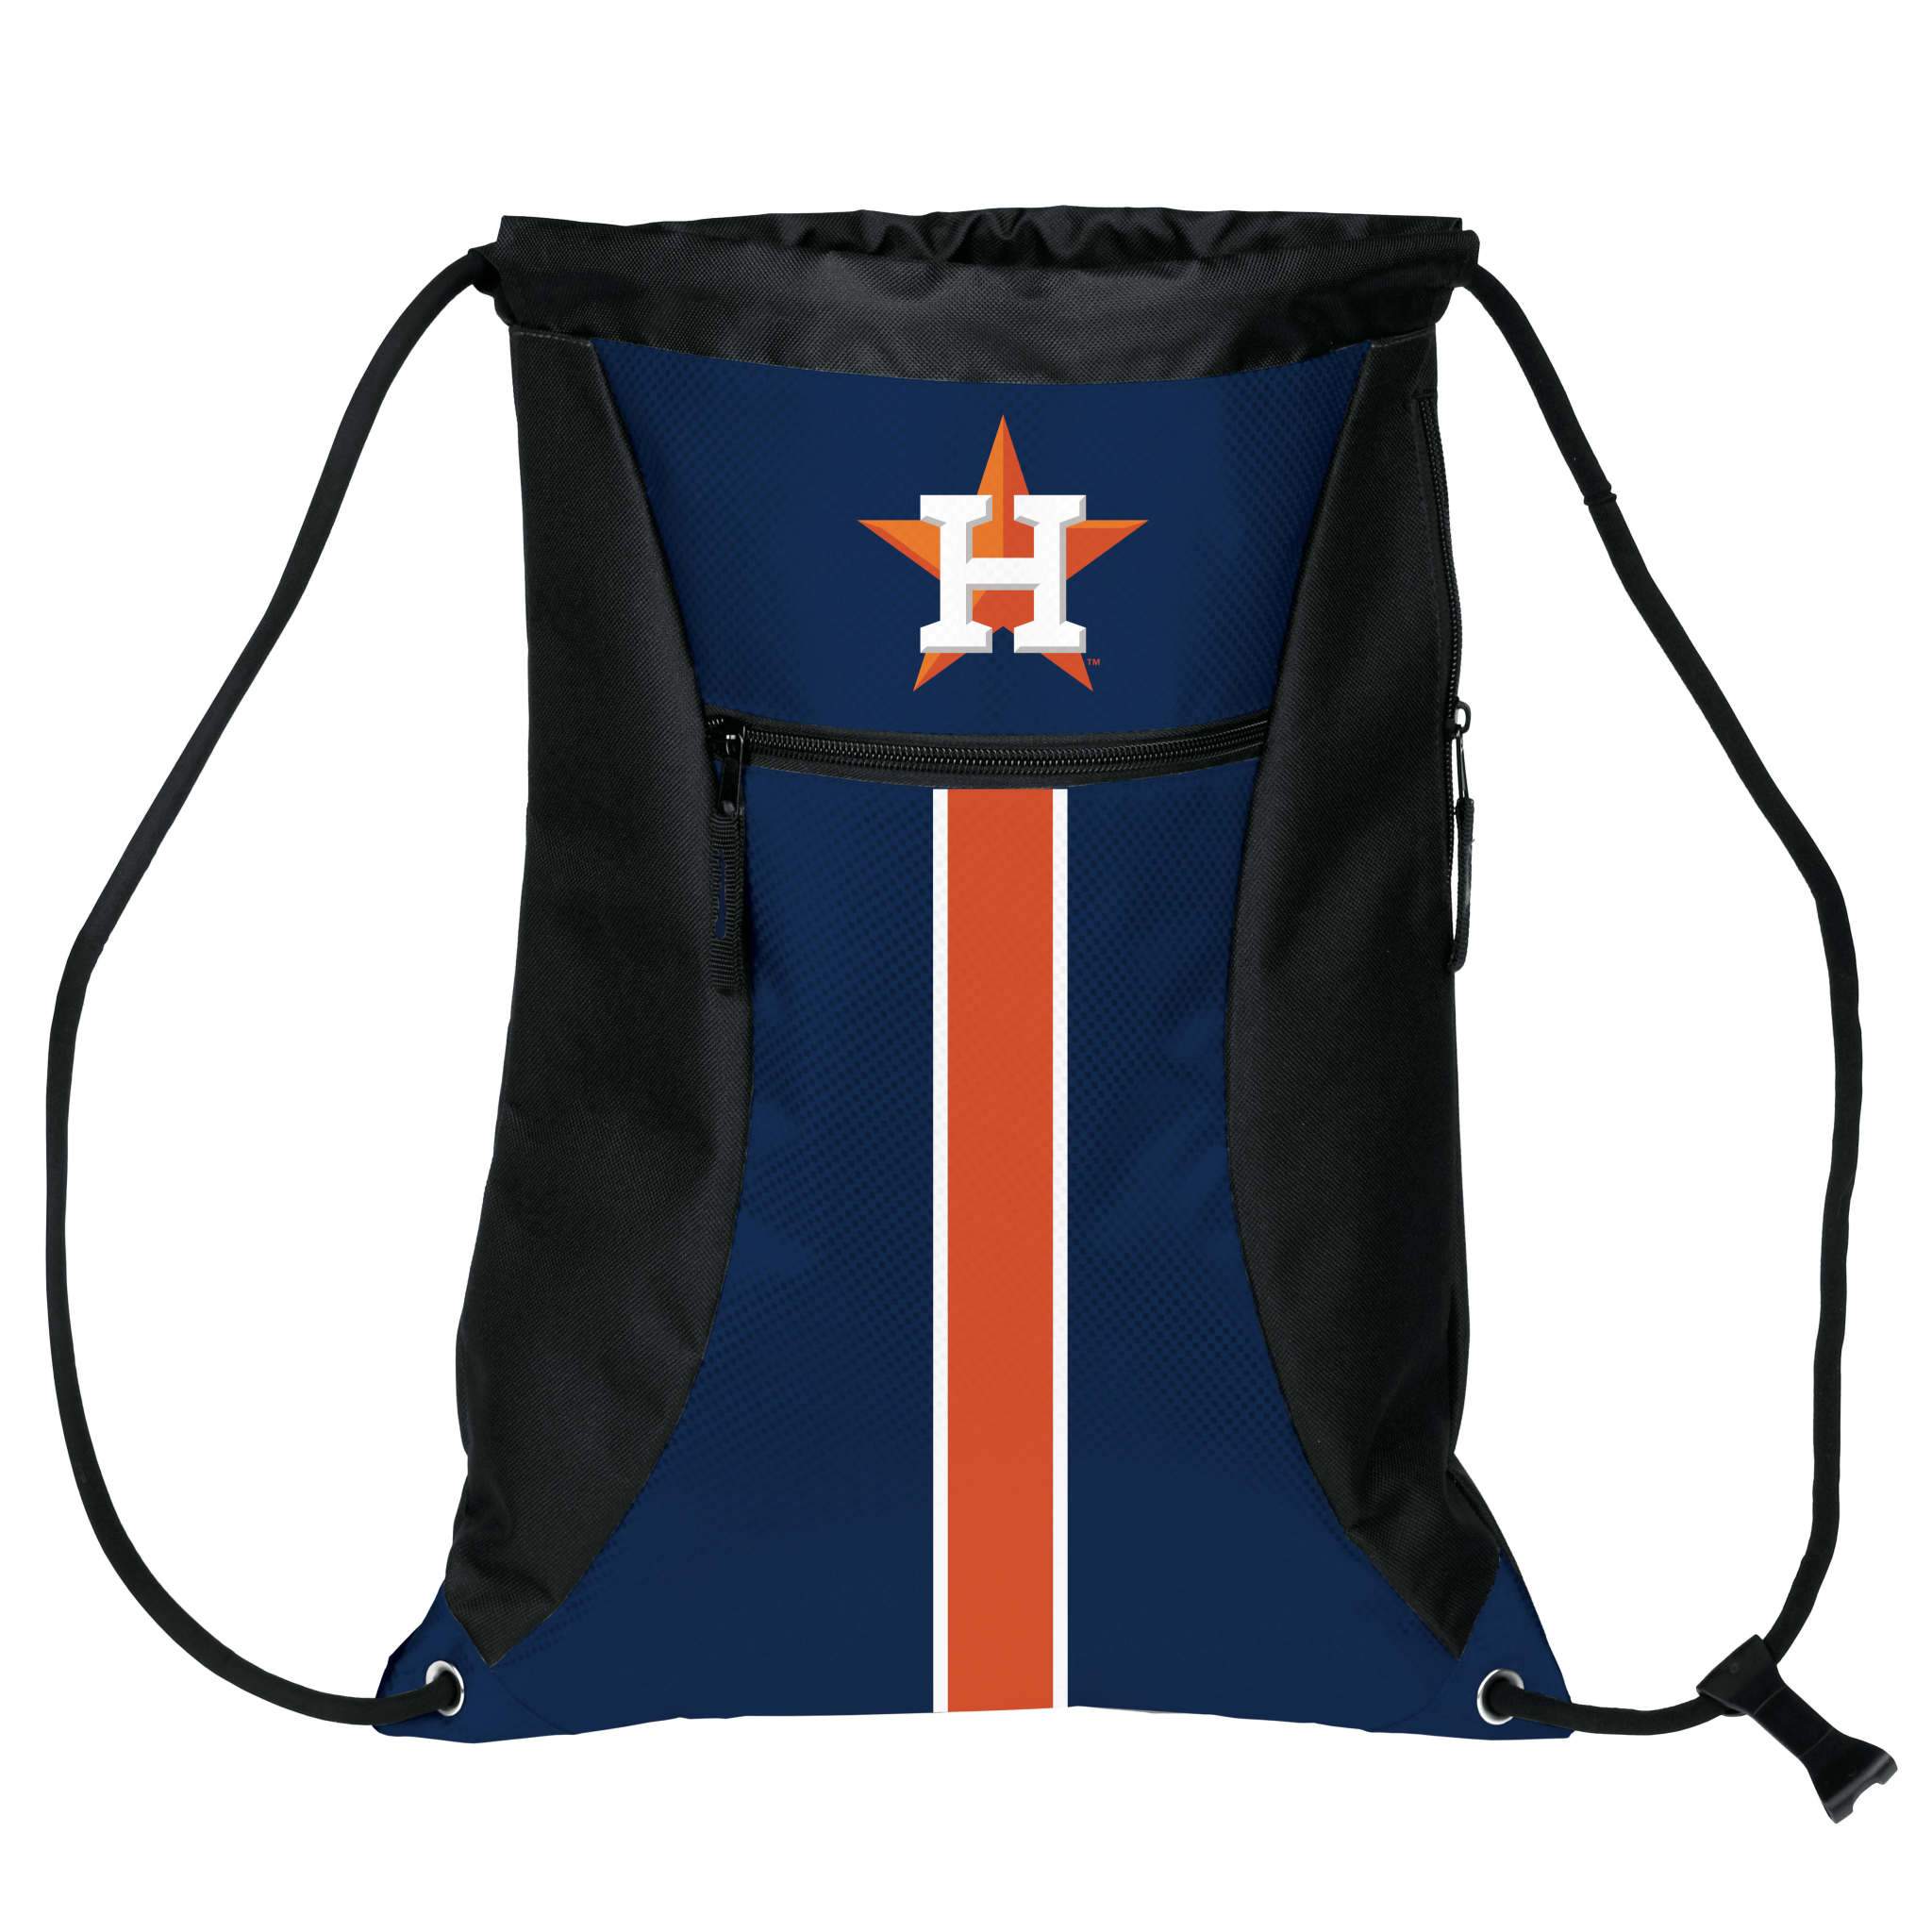 Astros Drawstring Bag /with Zipper Pouch